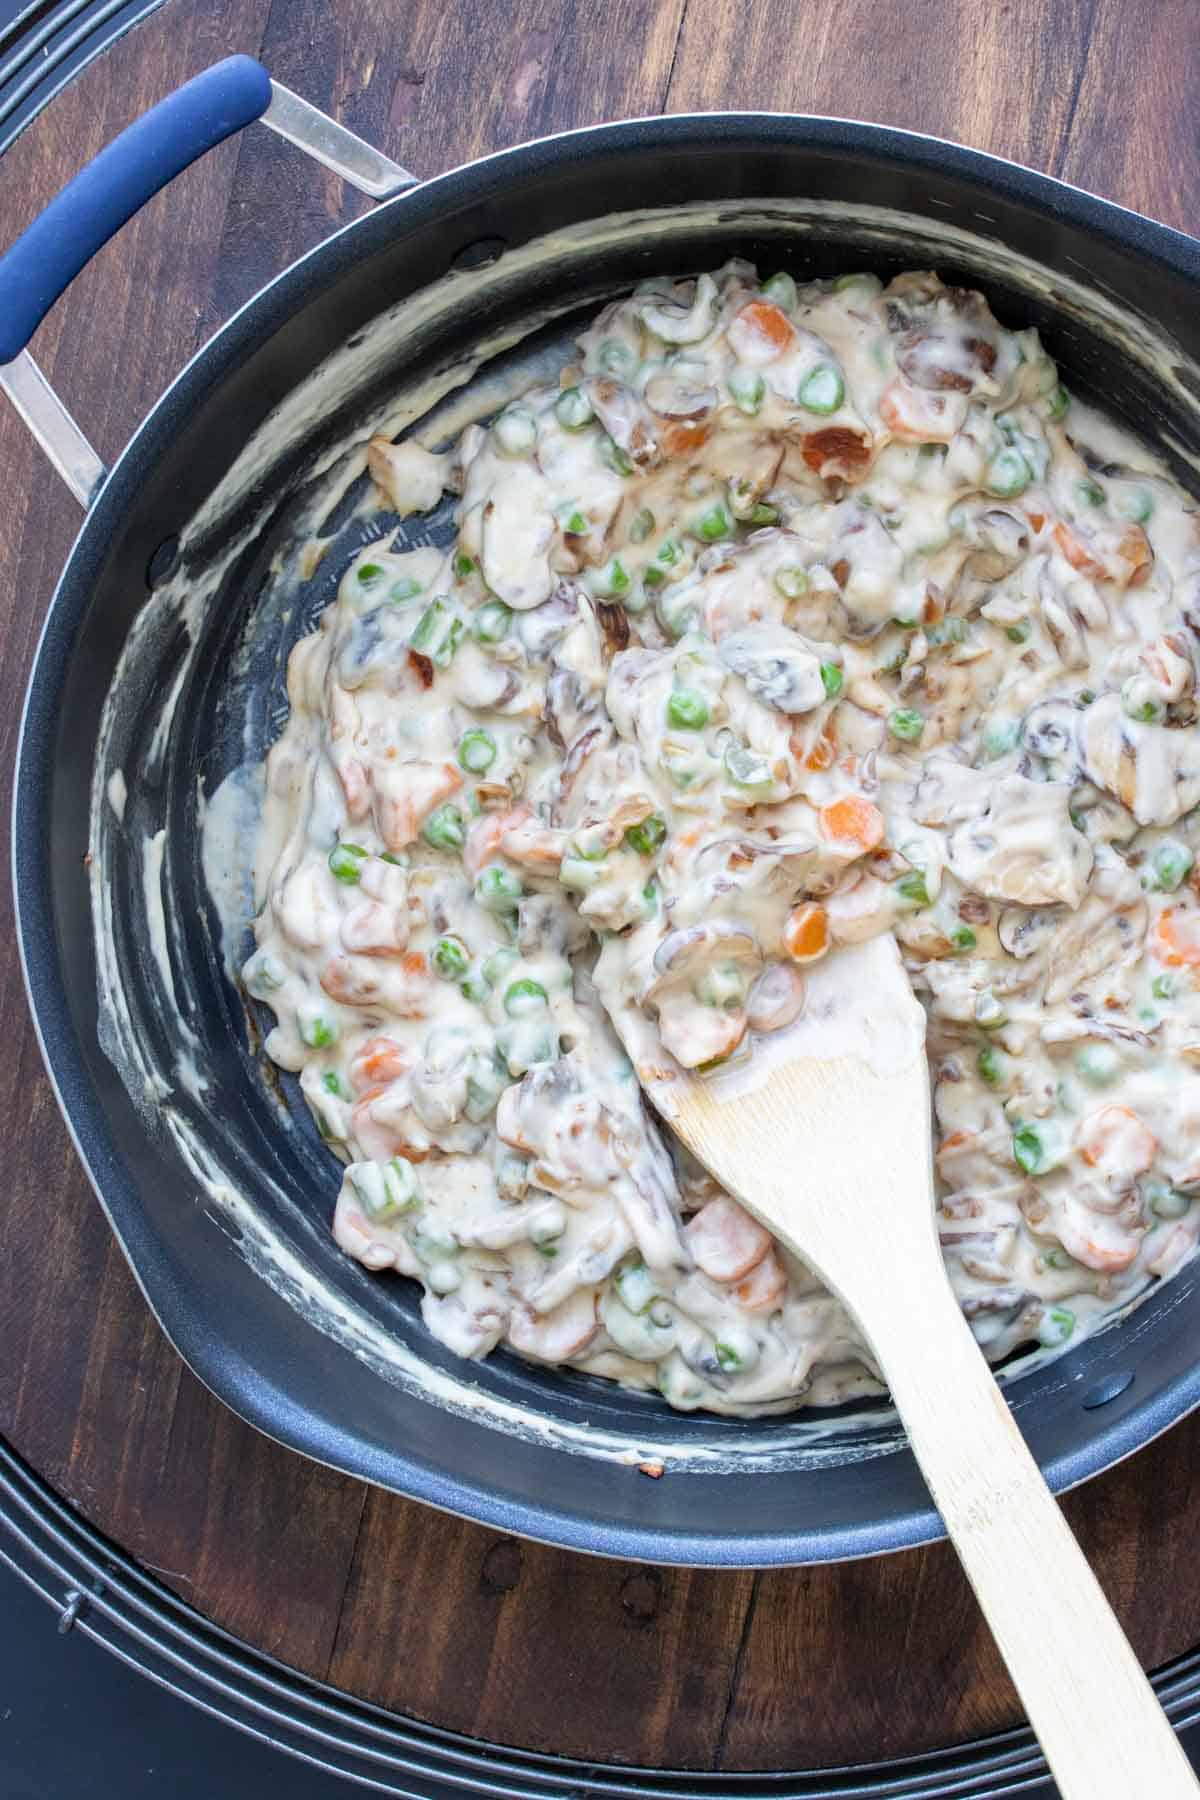 Wooden spoon mixing a creamy sauce into some veggies in a pan